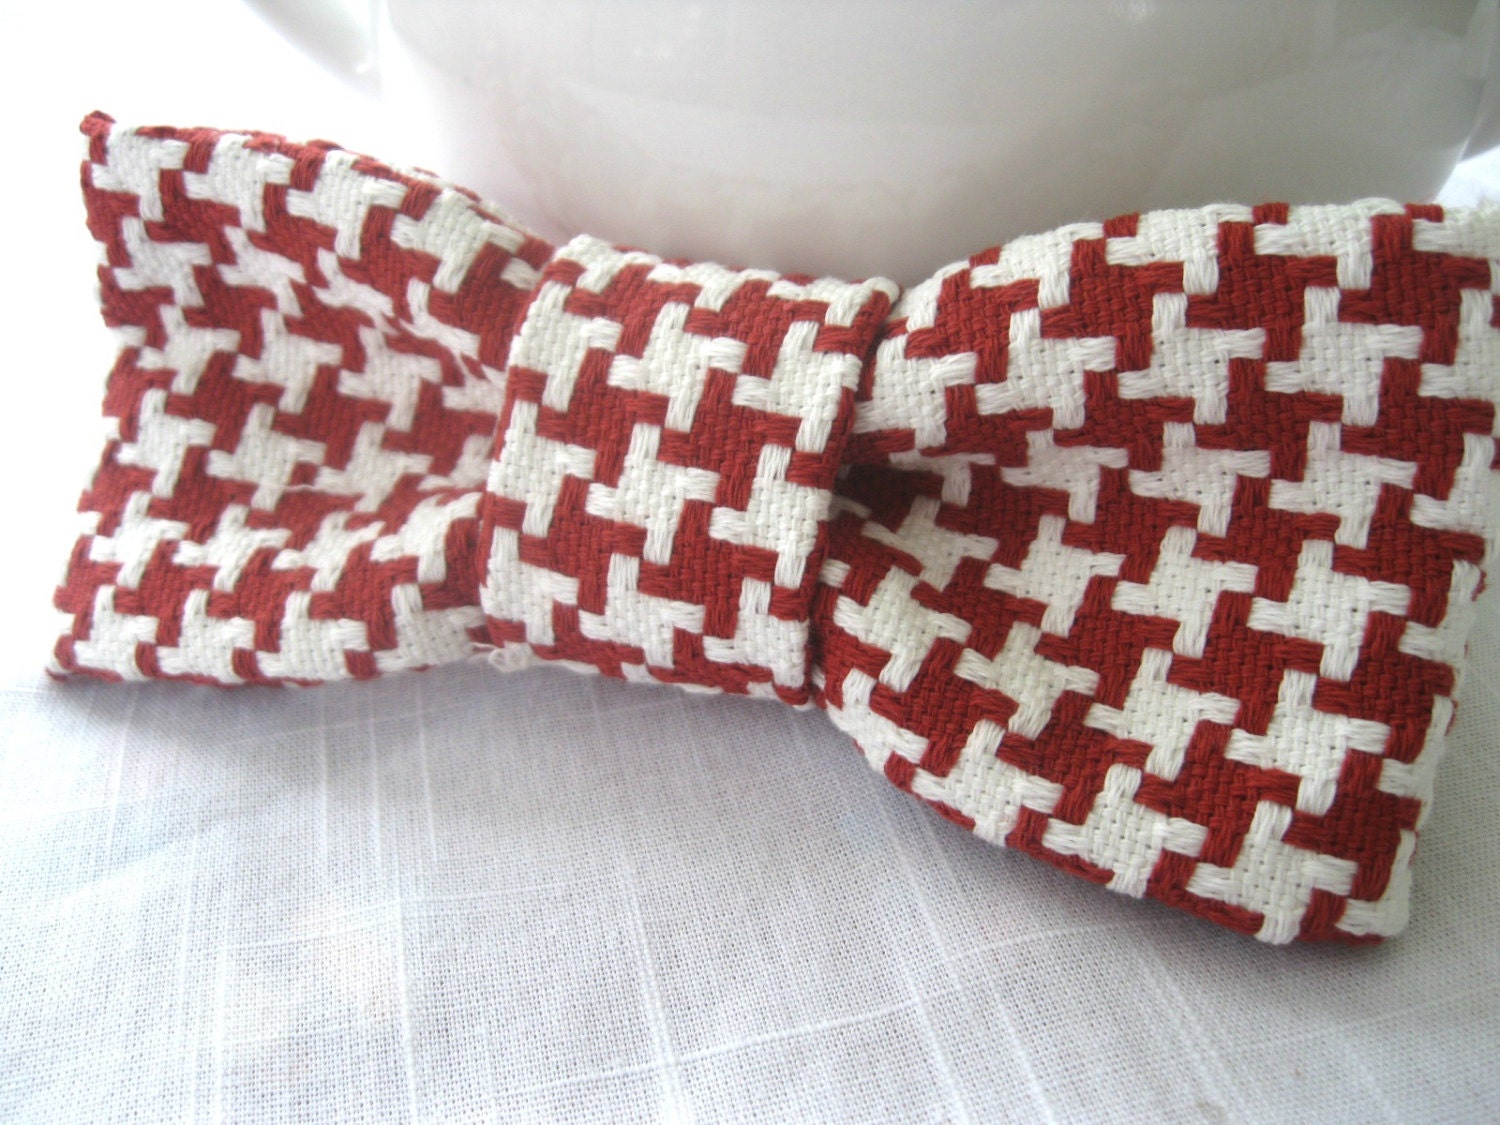 Red Houndstooth Hair Bow - Large Fabric Hair Bow : Upcycled Cotton in Red and White on Hair accessory of your choice Eco Friendly - SewEcological